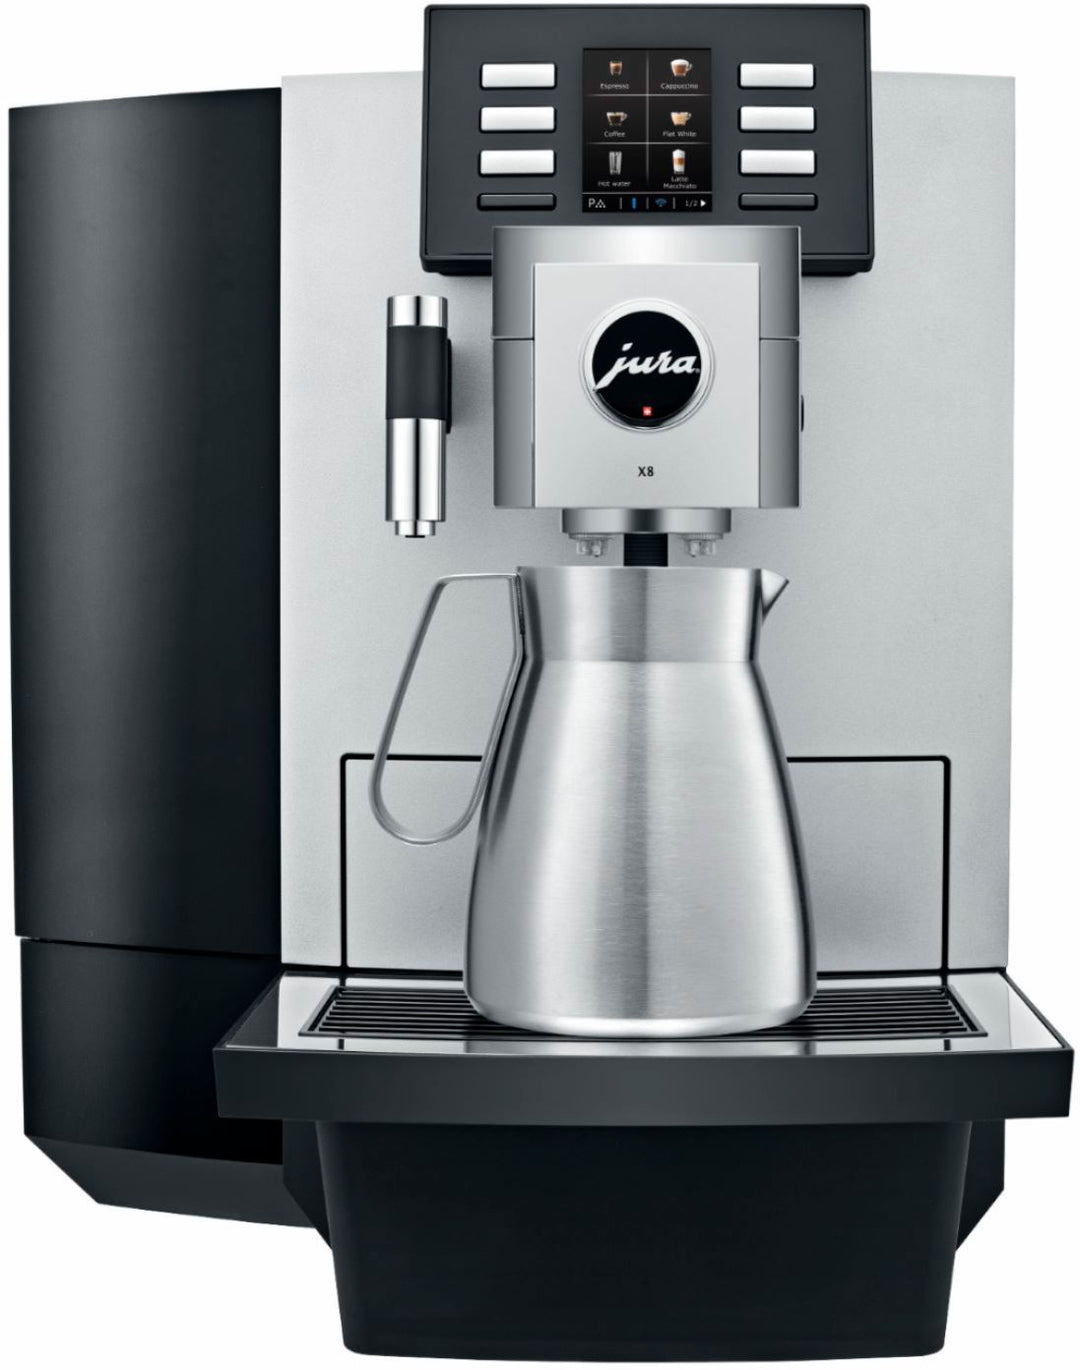 Jura - X8 Espresso Machine with 15 bars of pressure and intergrated grinder - Black and Chrome_11